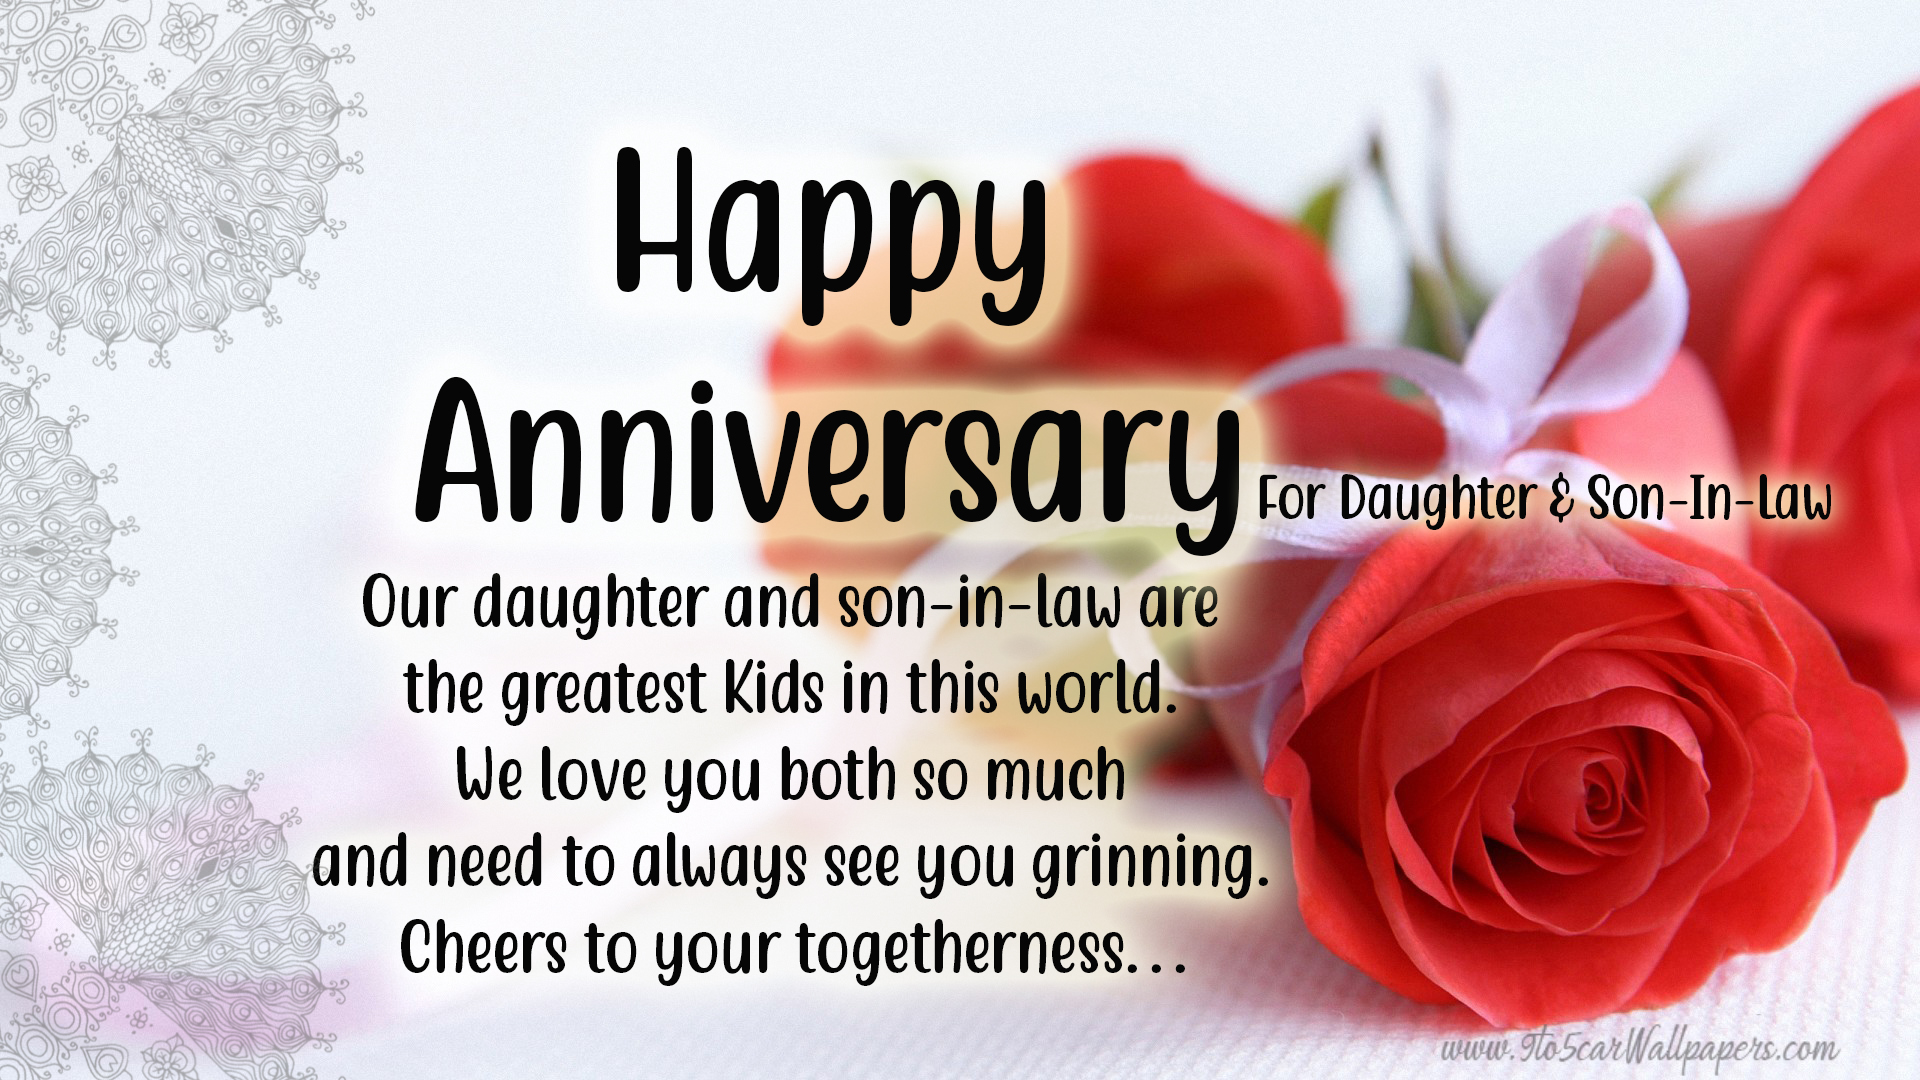 daughter-son-in-law-anniversary-wishes-my-site